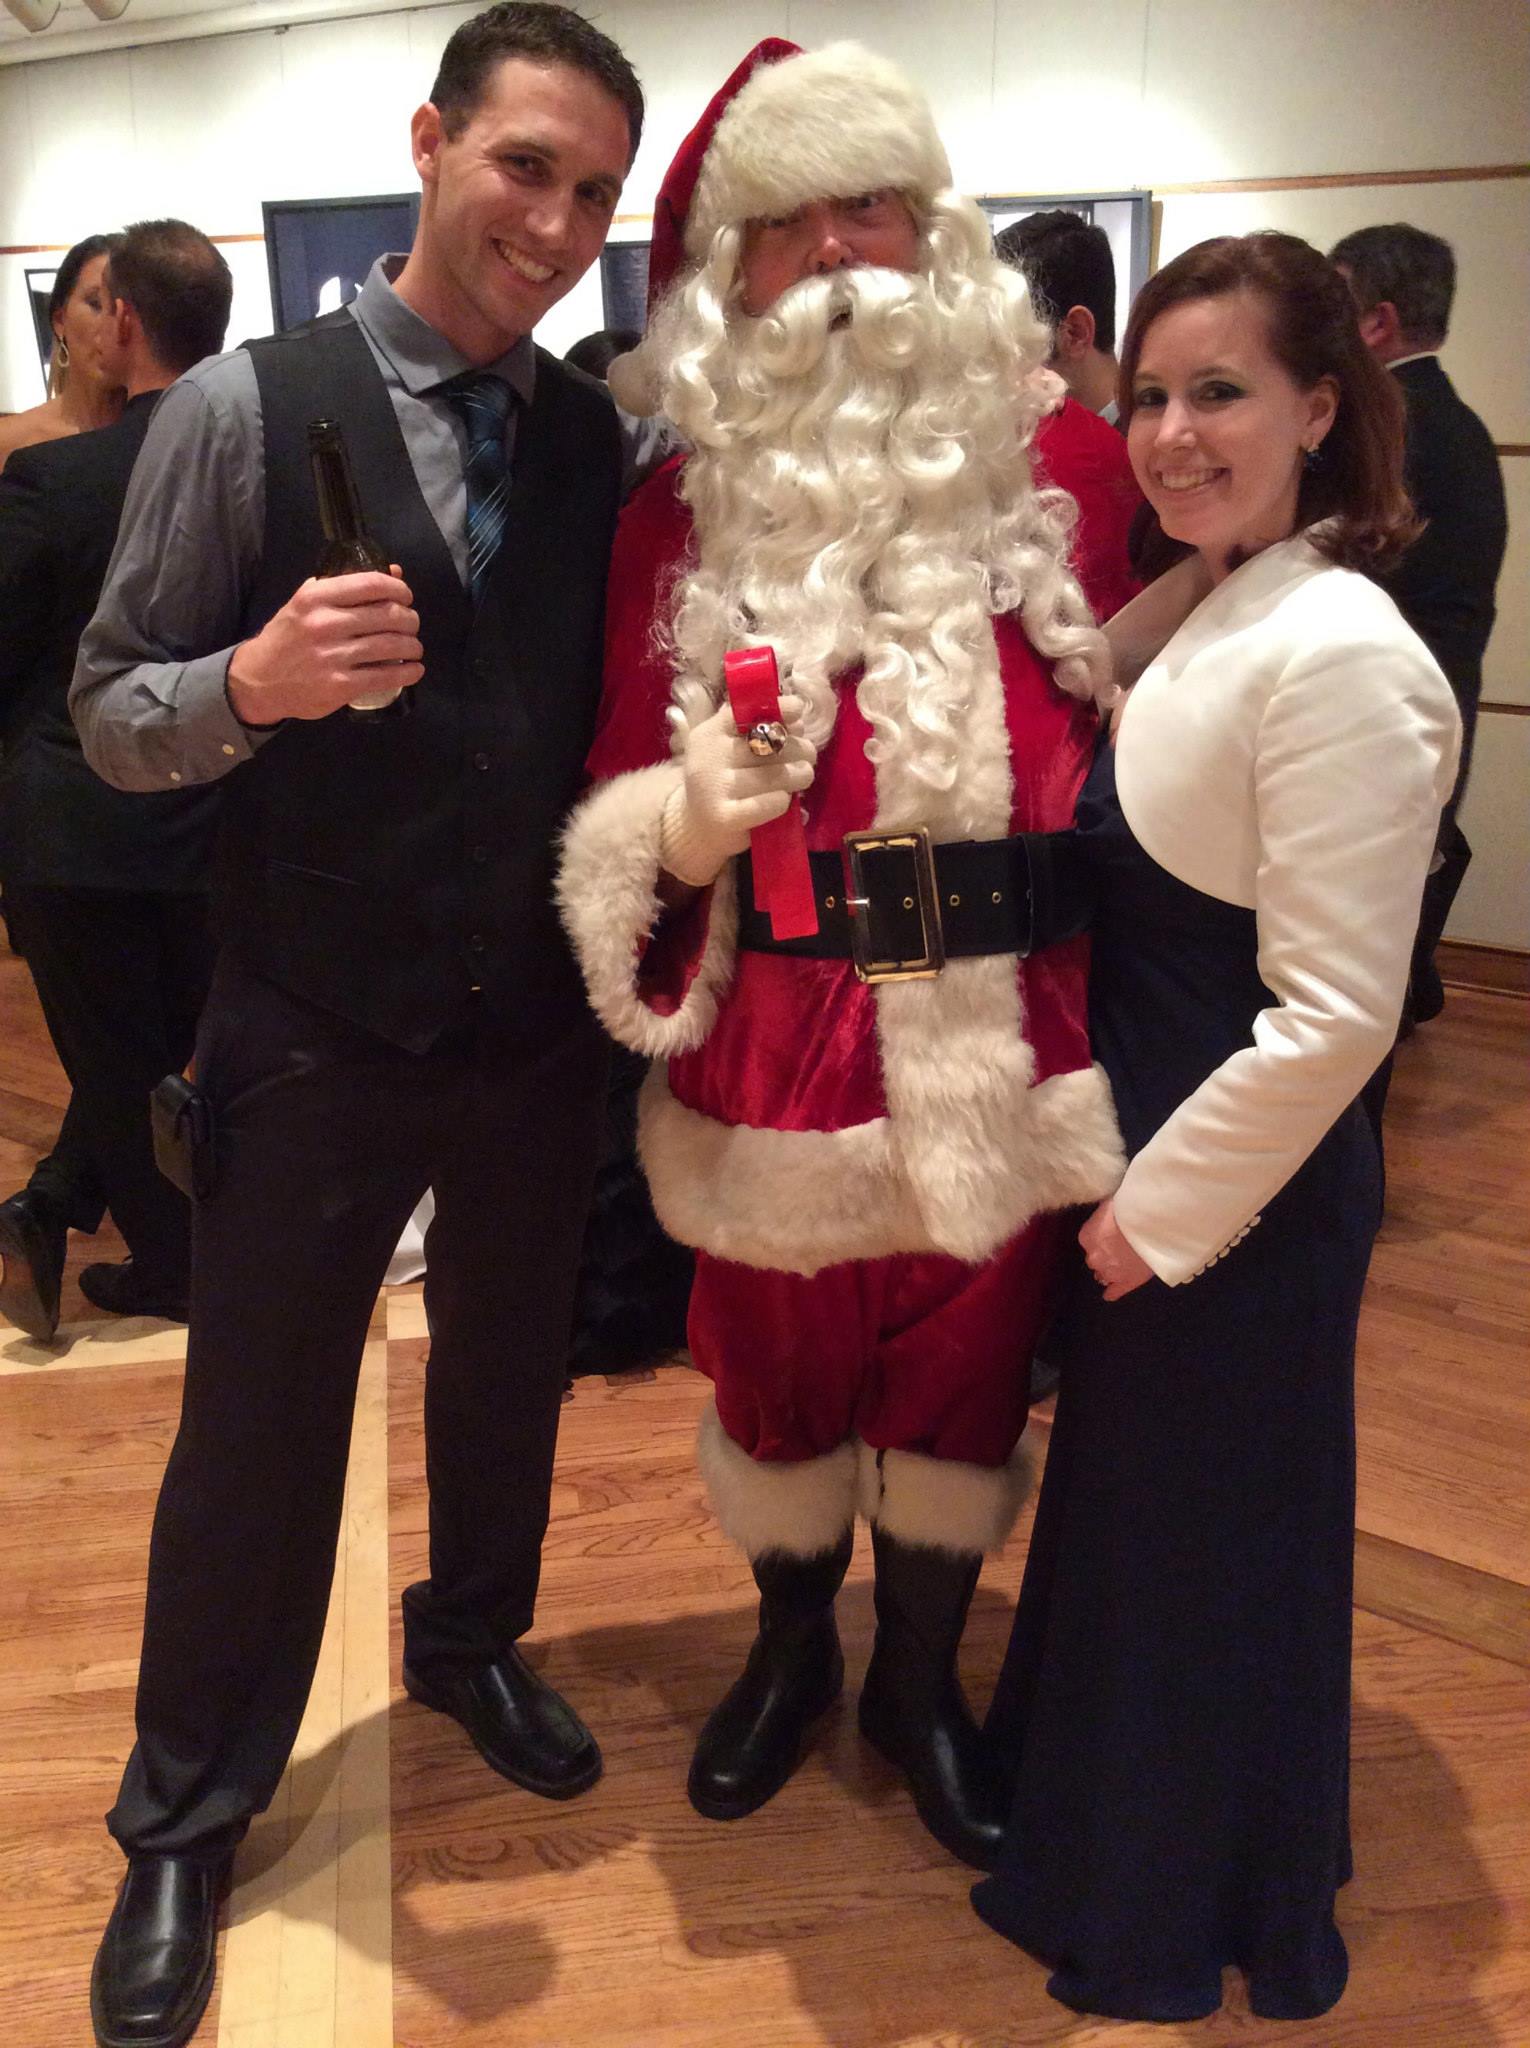 Viennese Holiday Charity Ball at the Embassy of Austria